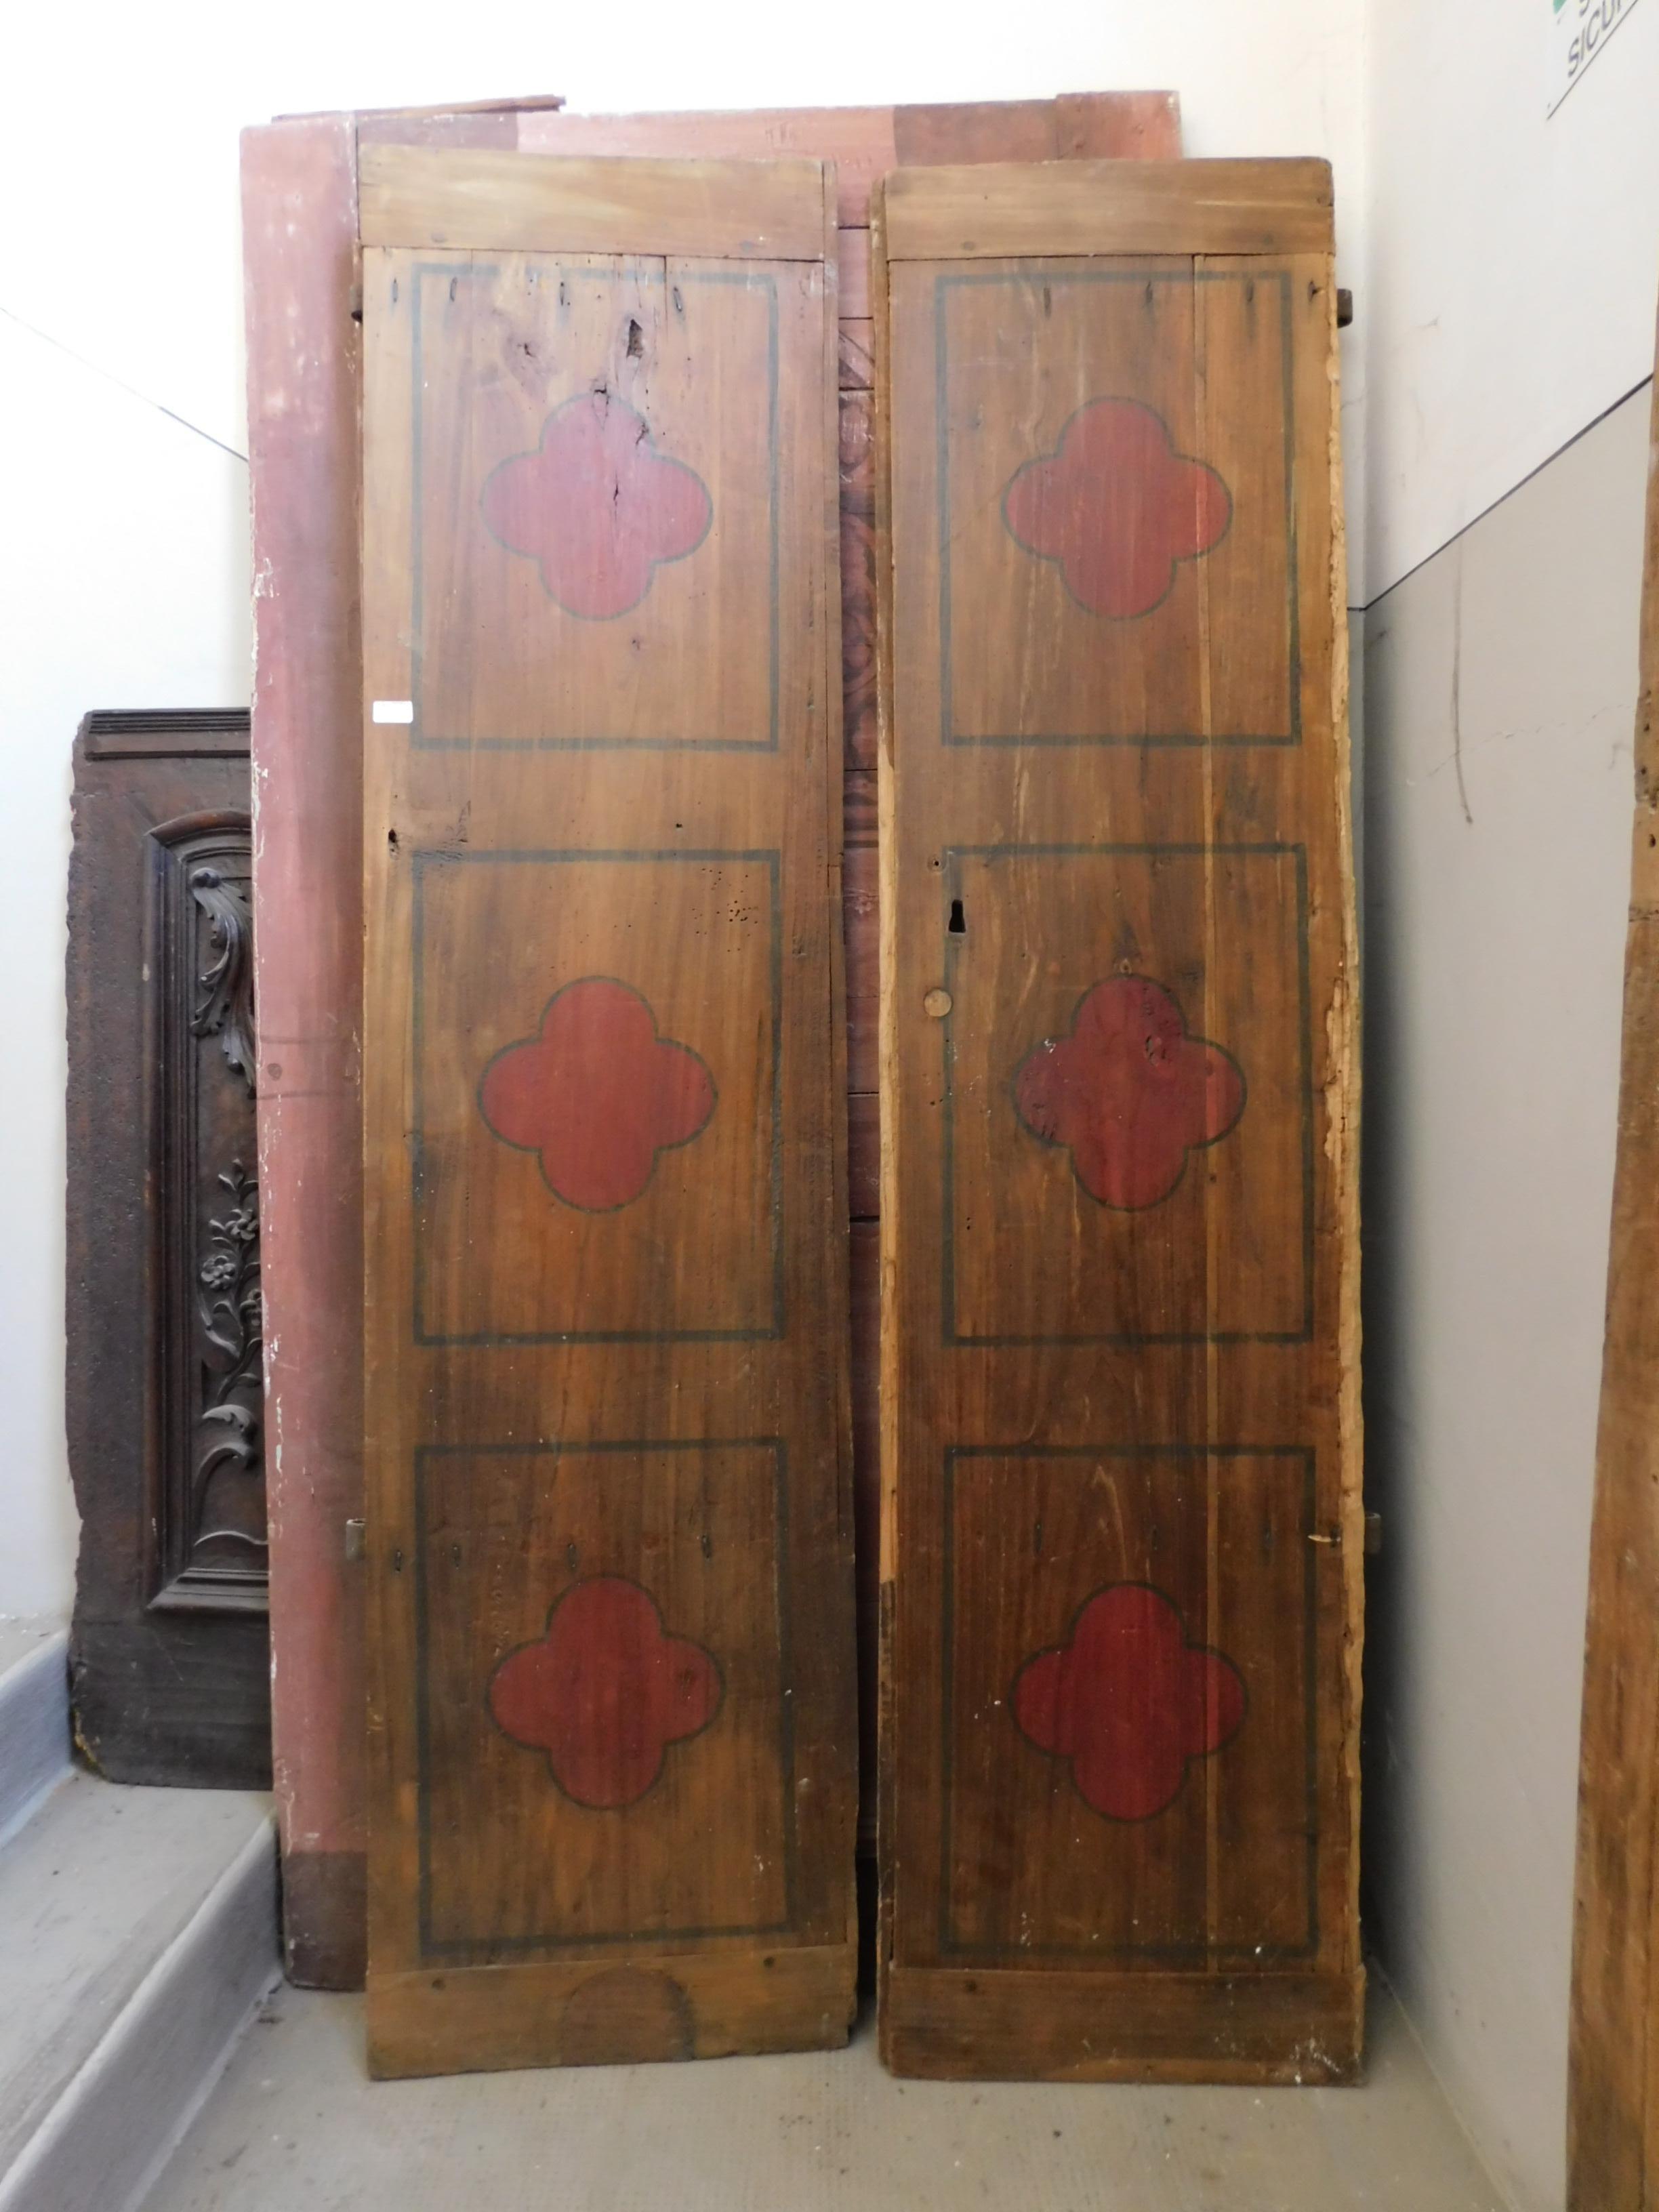 N.3 of 3 similar doors, coming from the same residence (Italian convent) but with different sizes, painted on a smooth background with tiles in front and behind, original and not very heavy irons, which can also be used as cabinet doors or